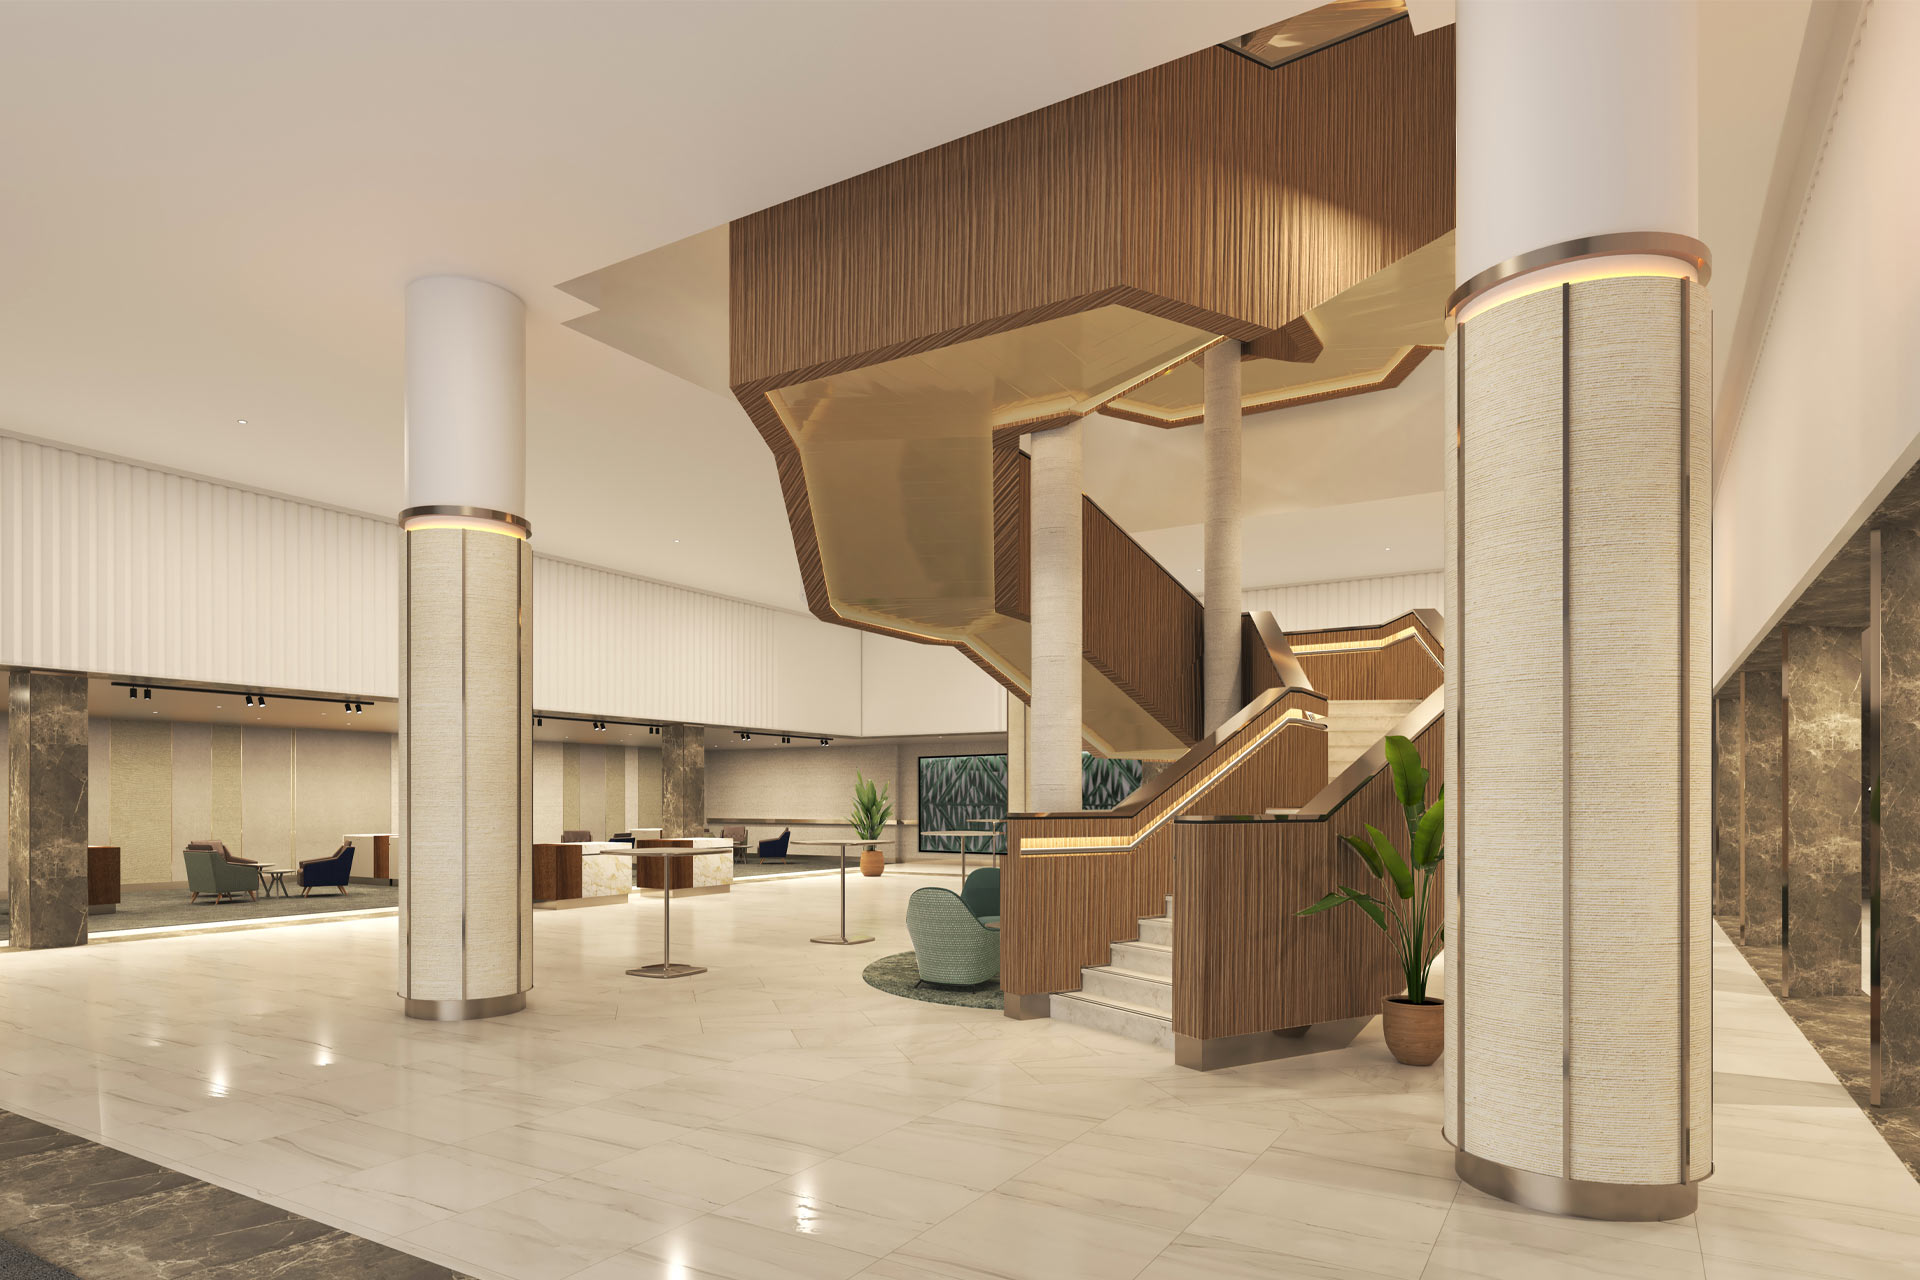 A rendering of the new West Wing Lobby at Hilton London Metropole